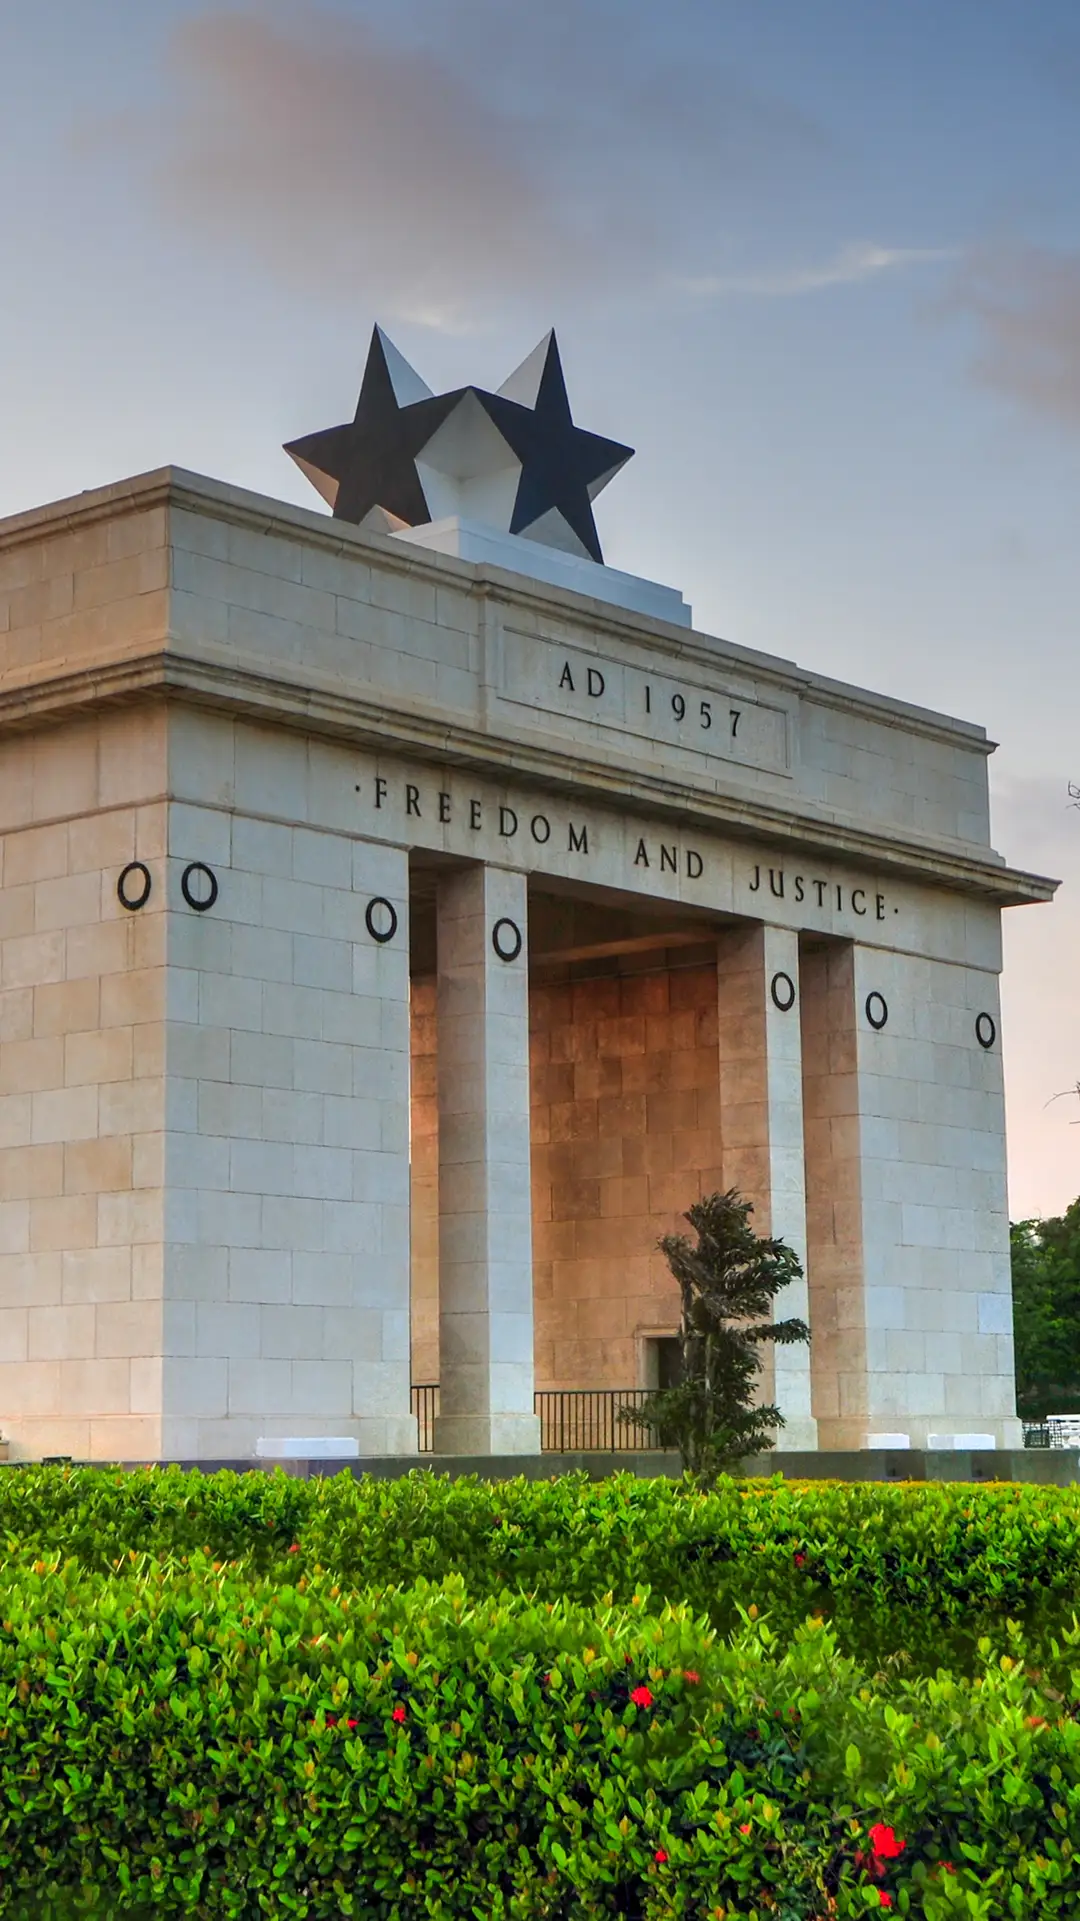 Independence Arch, Accra, Ghana.